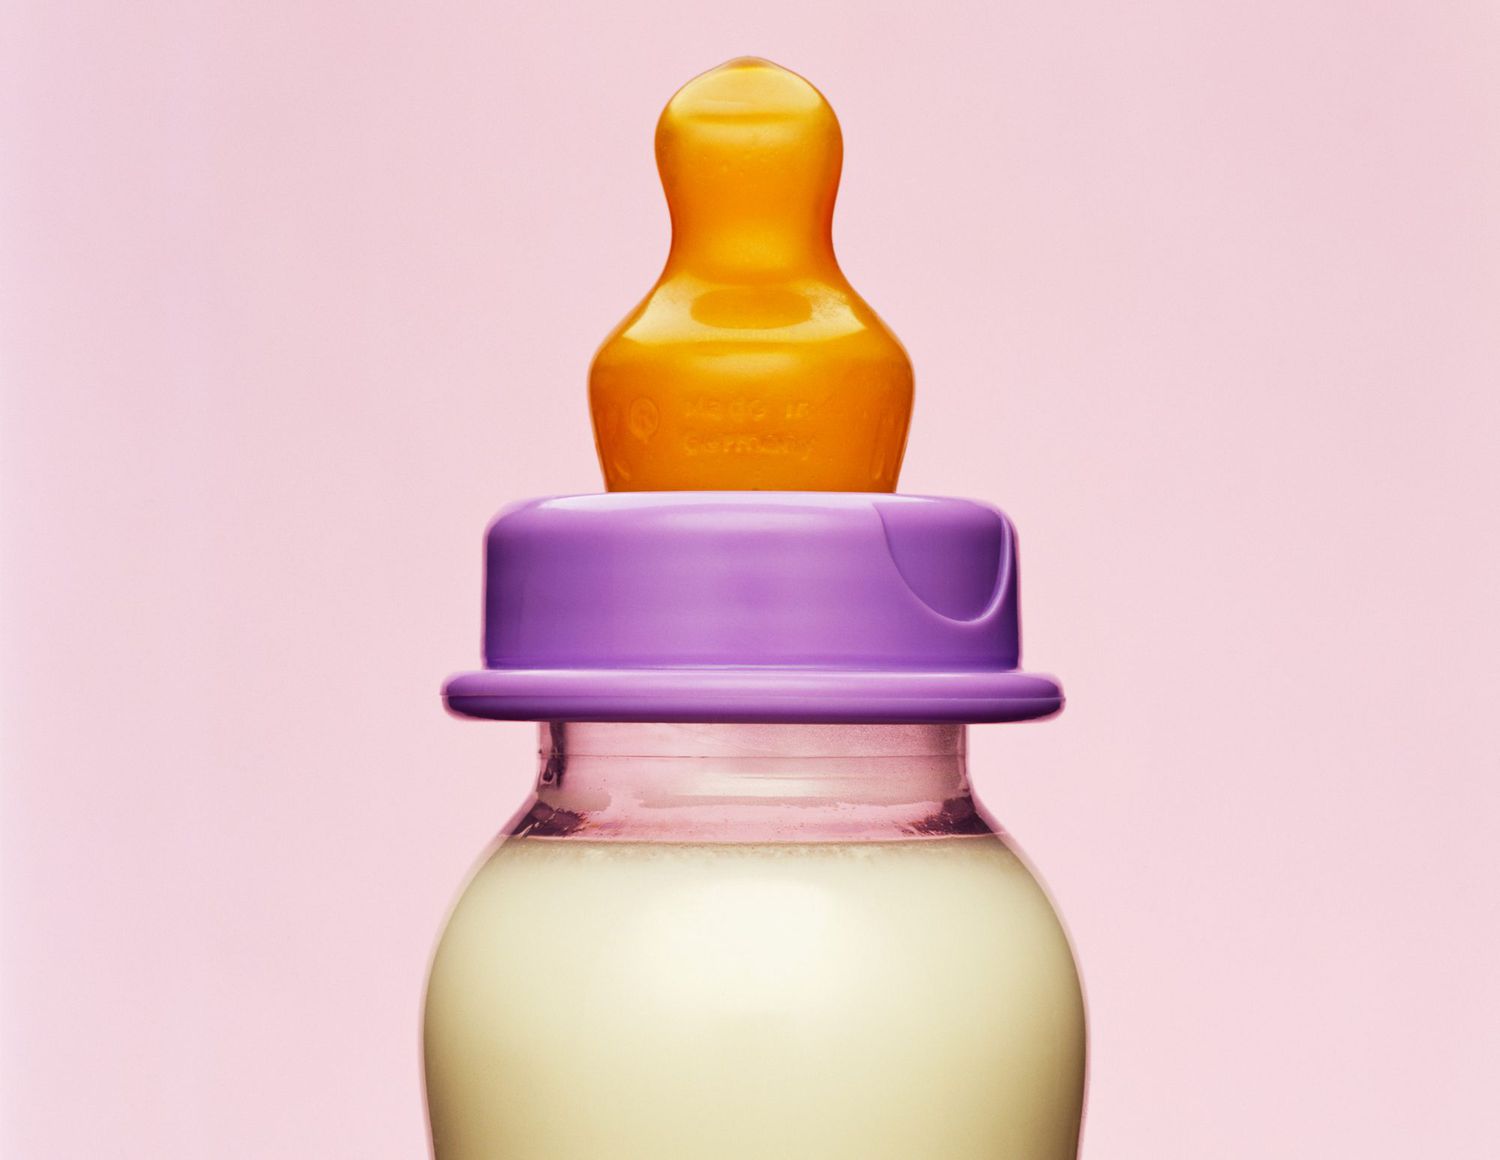 An image of a baby bottle with milk in it.